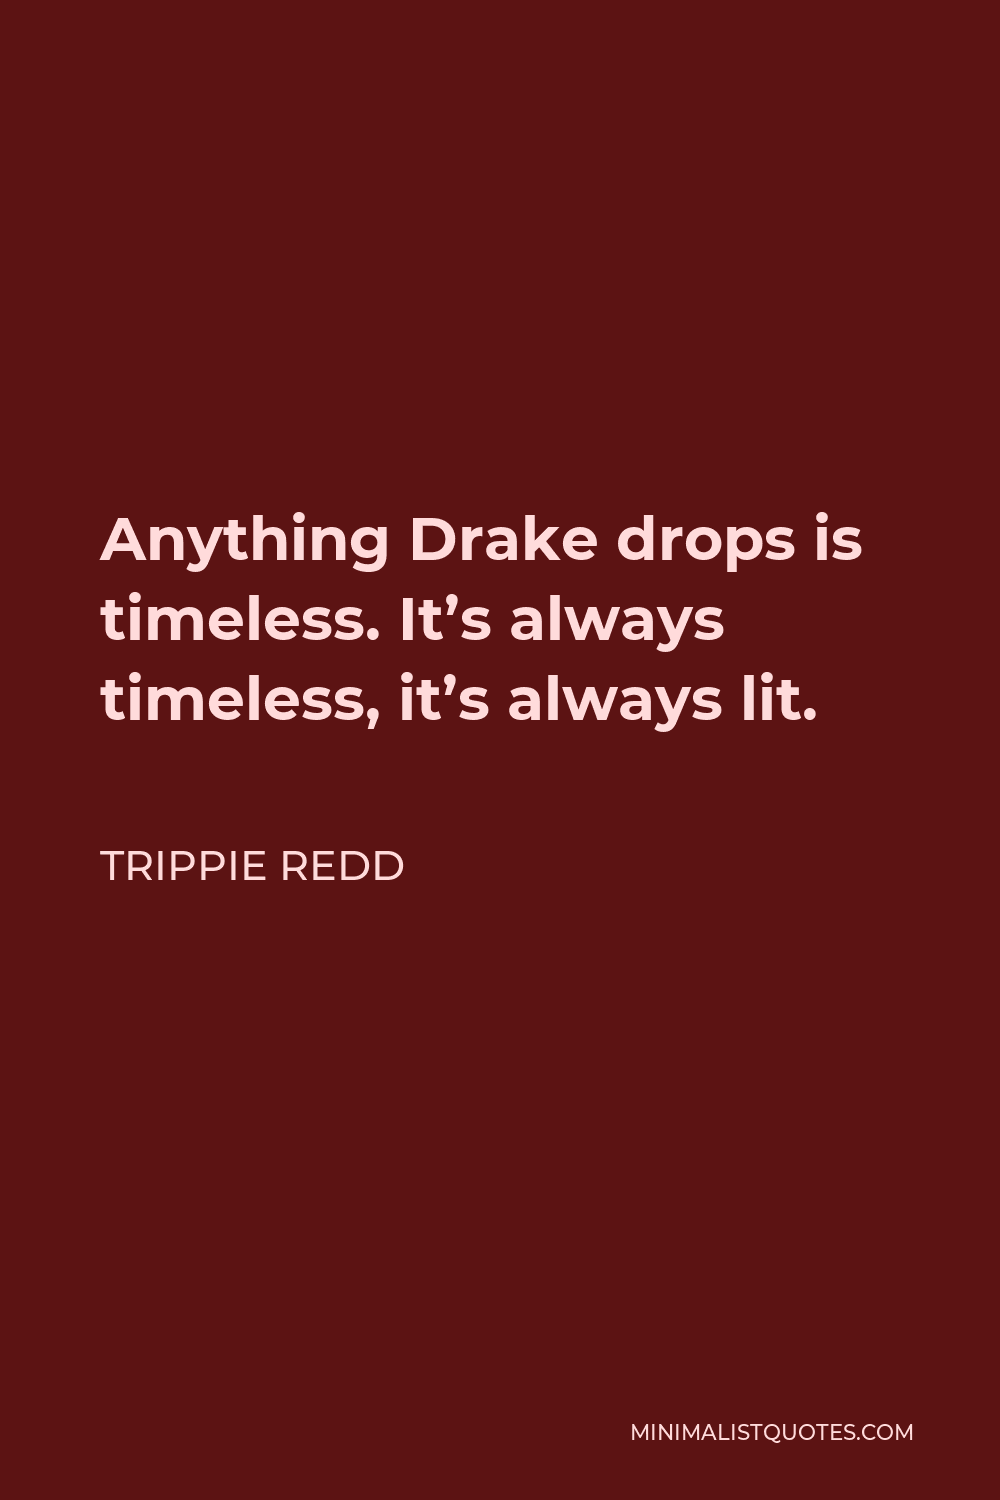 Trippie Redd Quote - Anything Drake drops is timeless. It’s always timeless, it’s always lit.